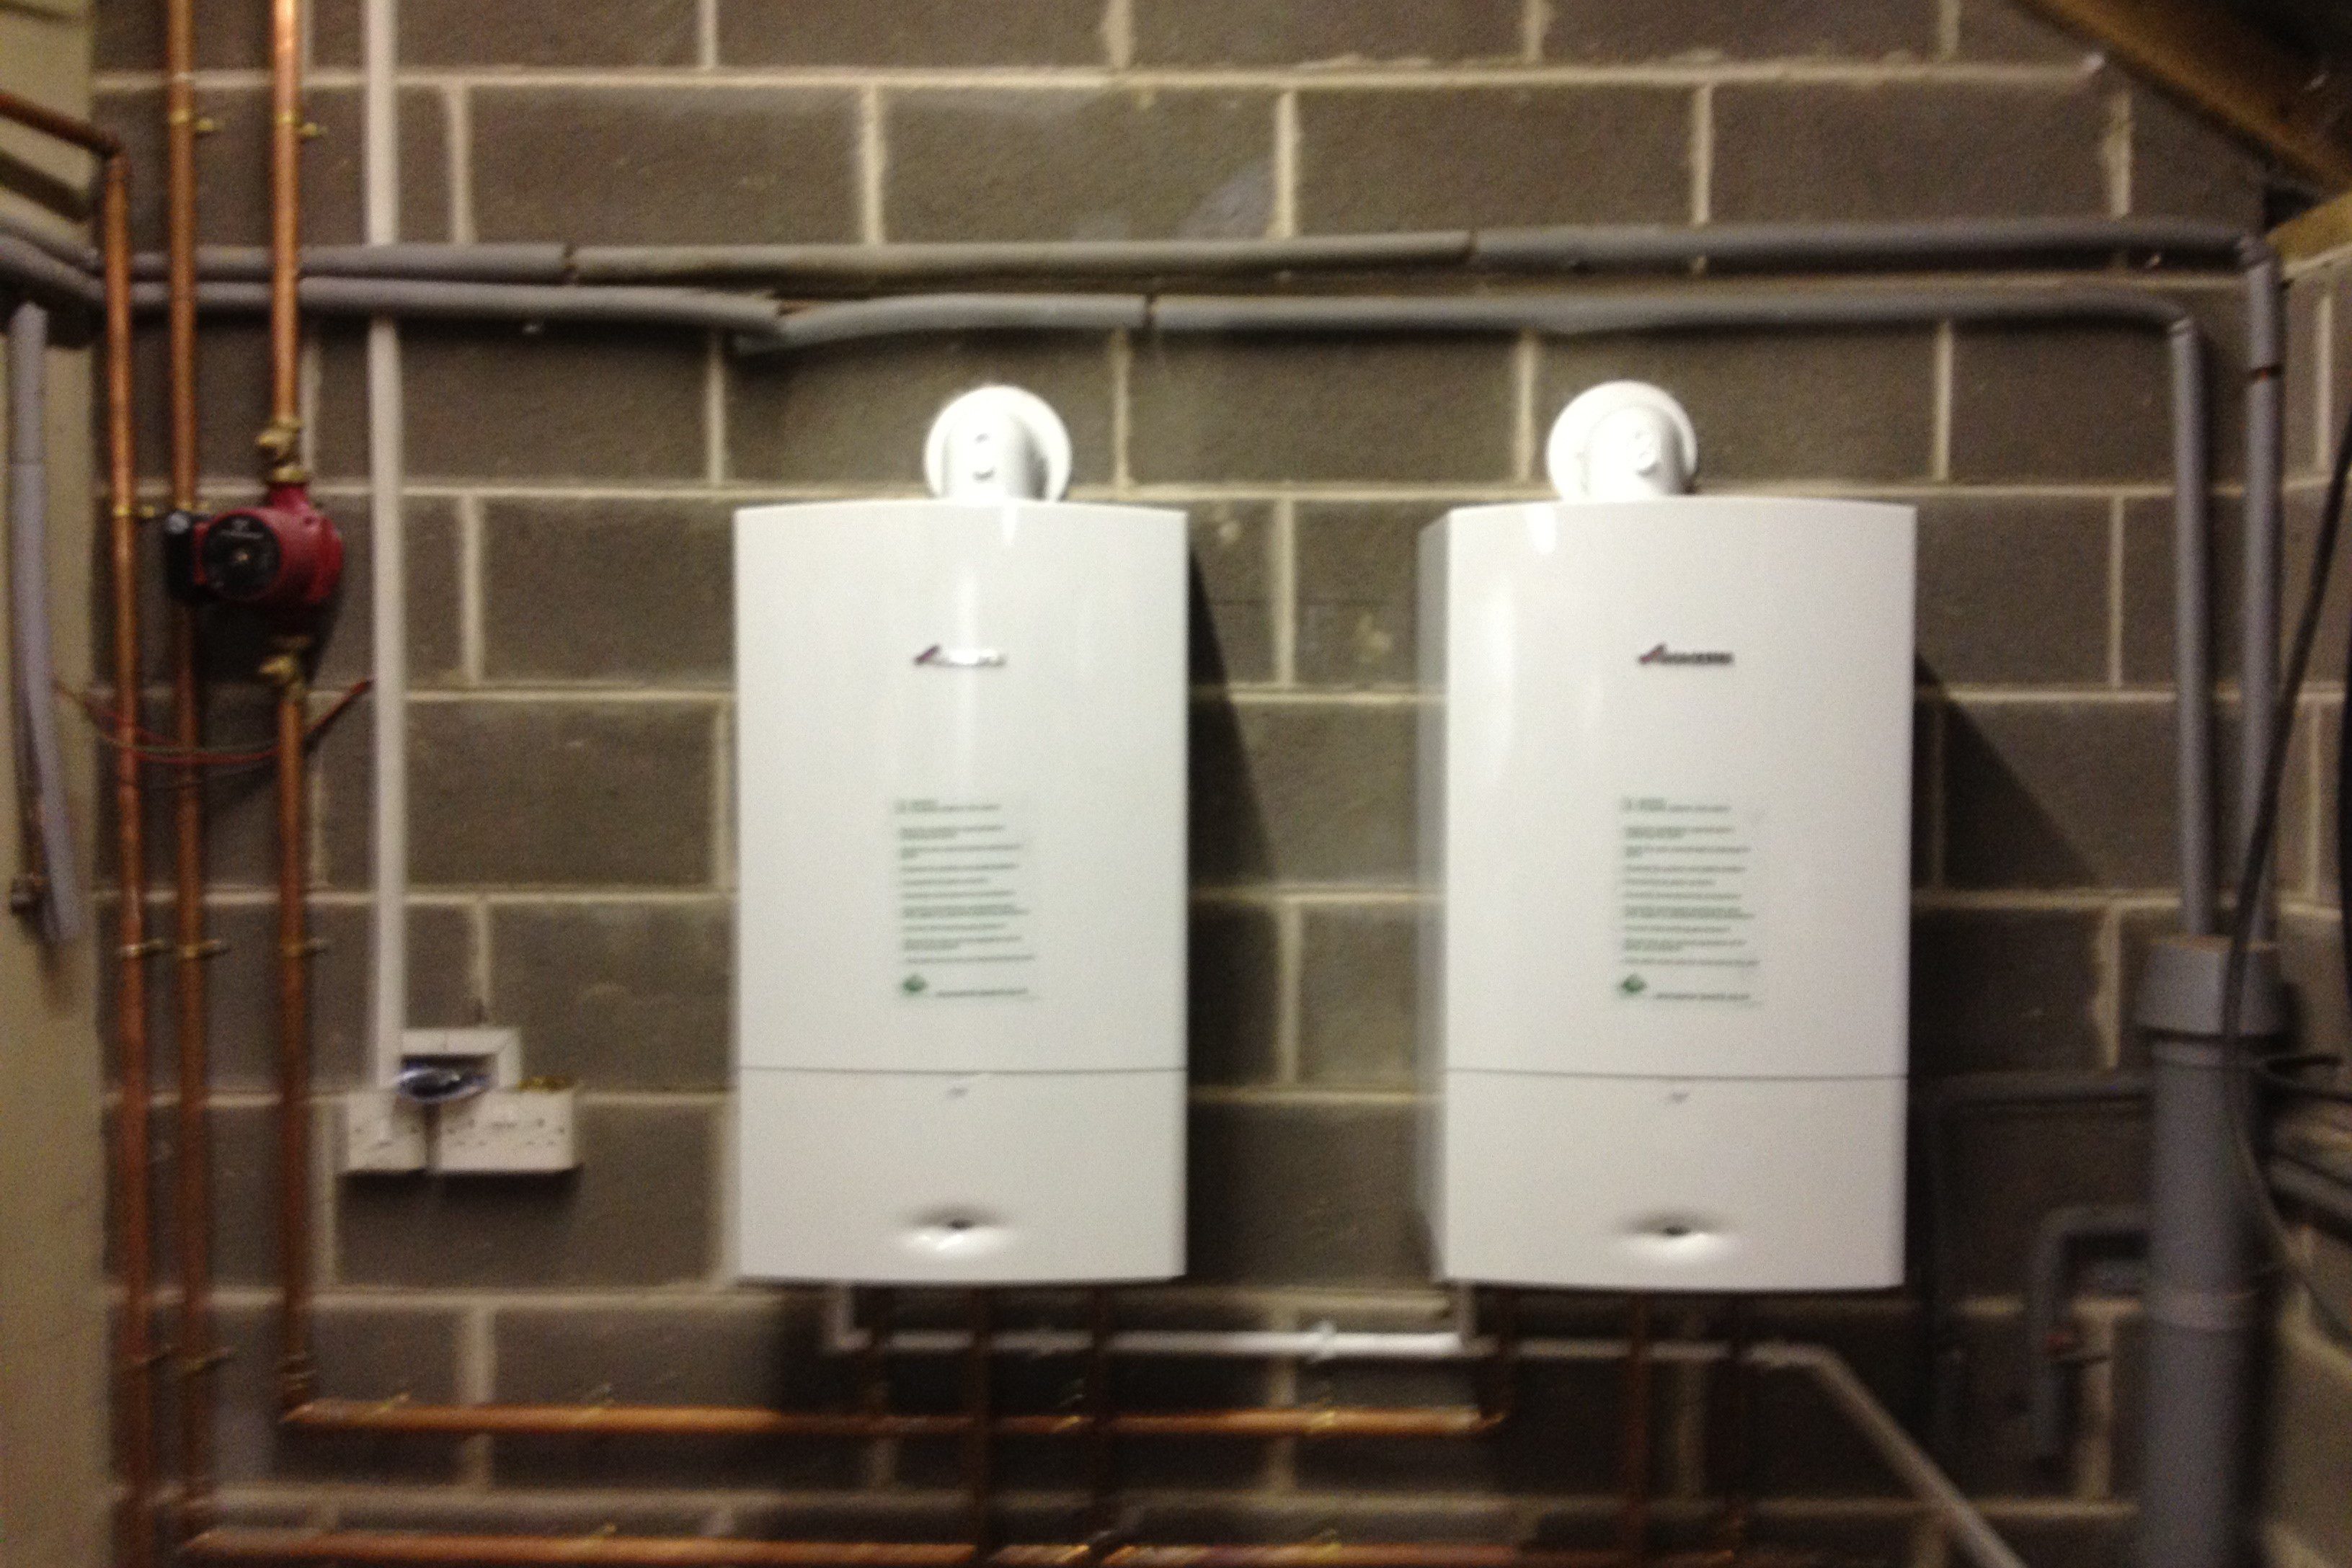 3-2 Two Worcester 40 cdi boilers piped on a header for large properties with a high central heating demand